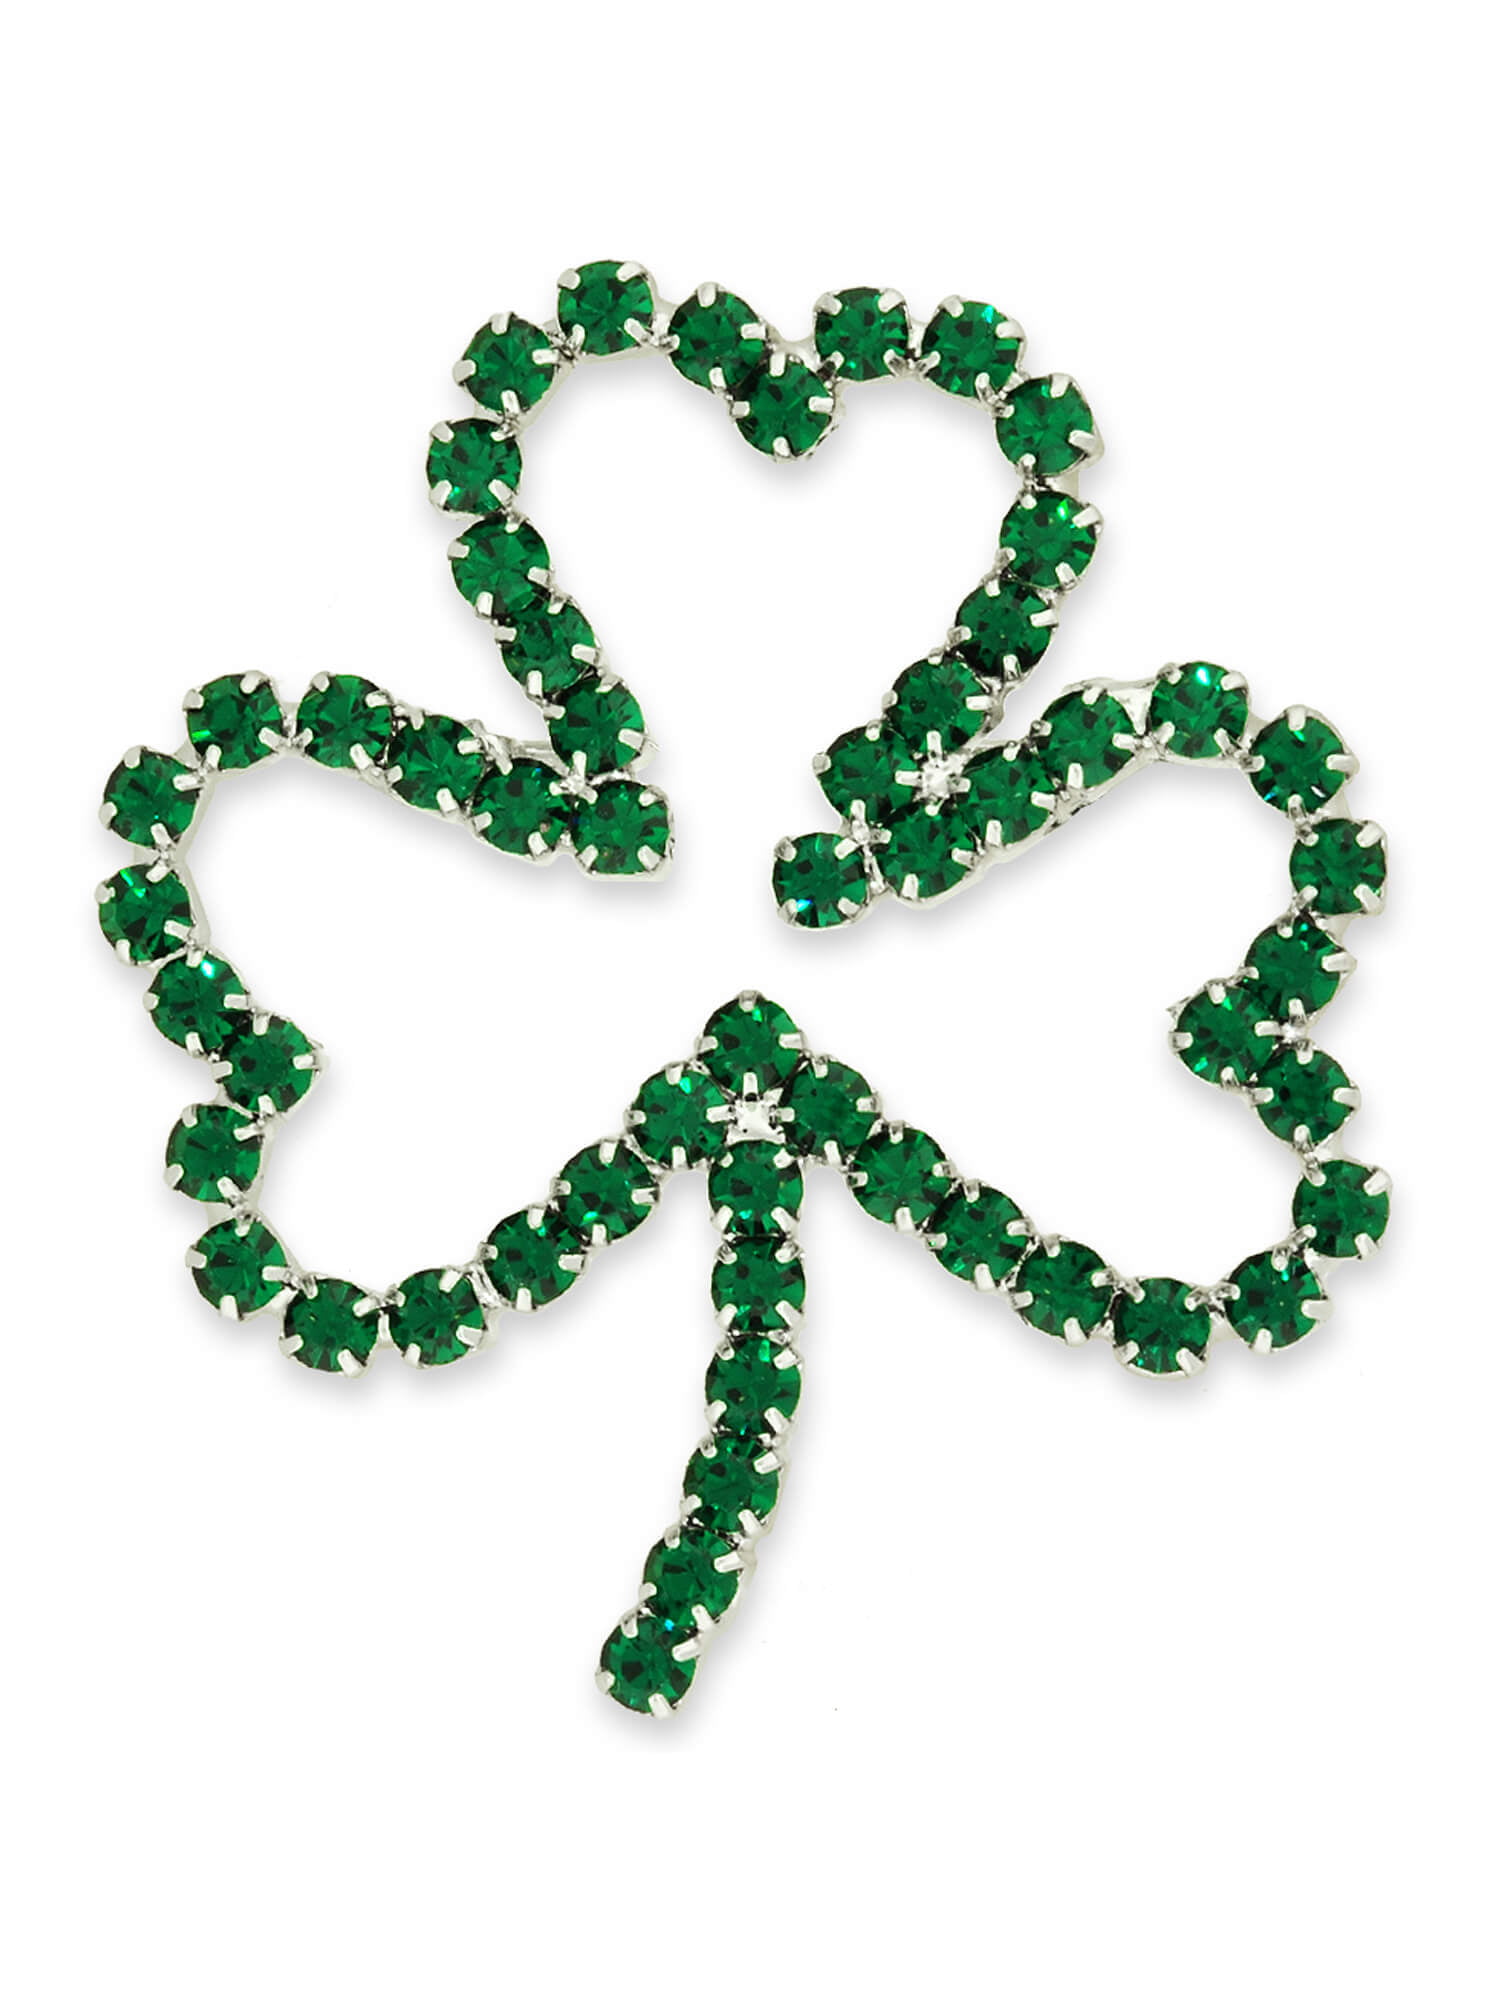 Patrick Day NEW Shamrock Details about   Lot Of 12 Unisex Necklace Jewerly Party Favor St 